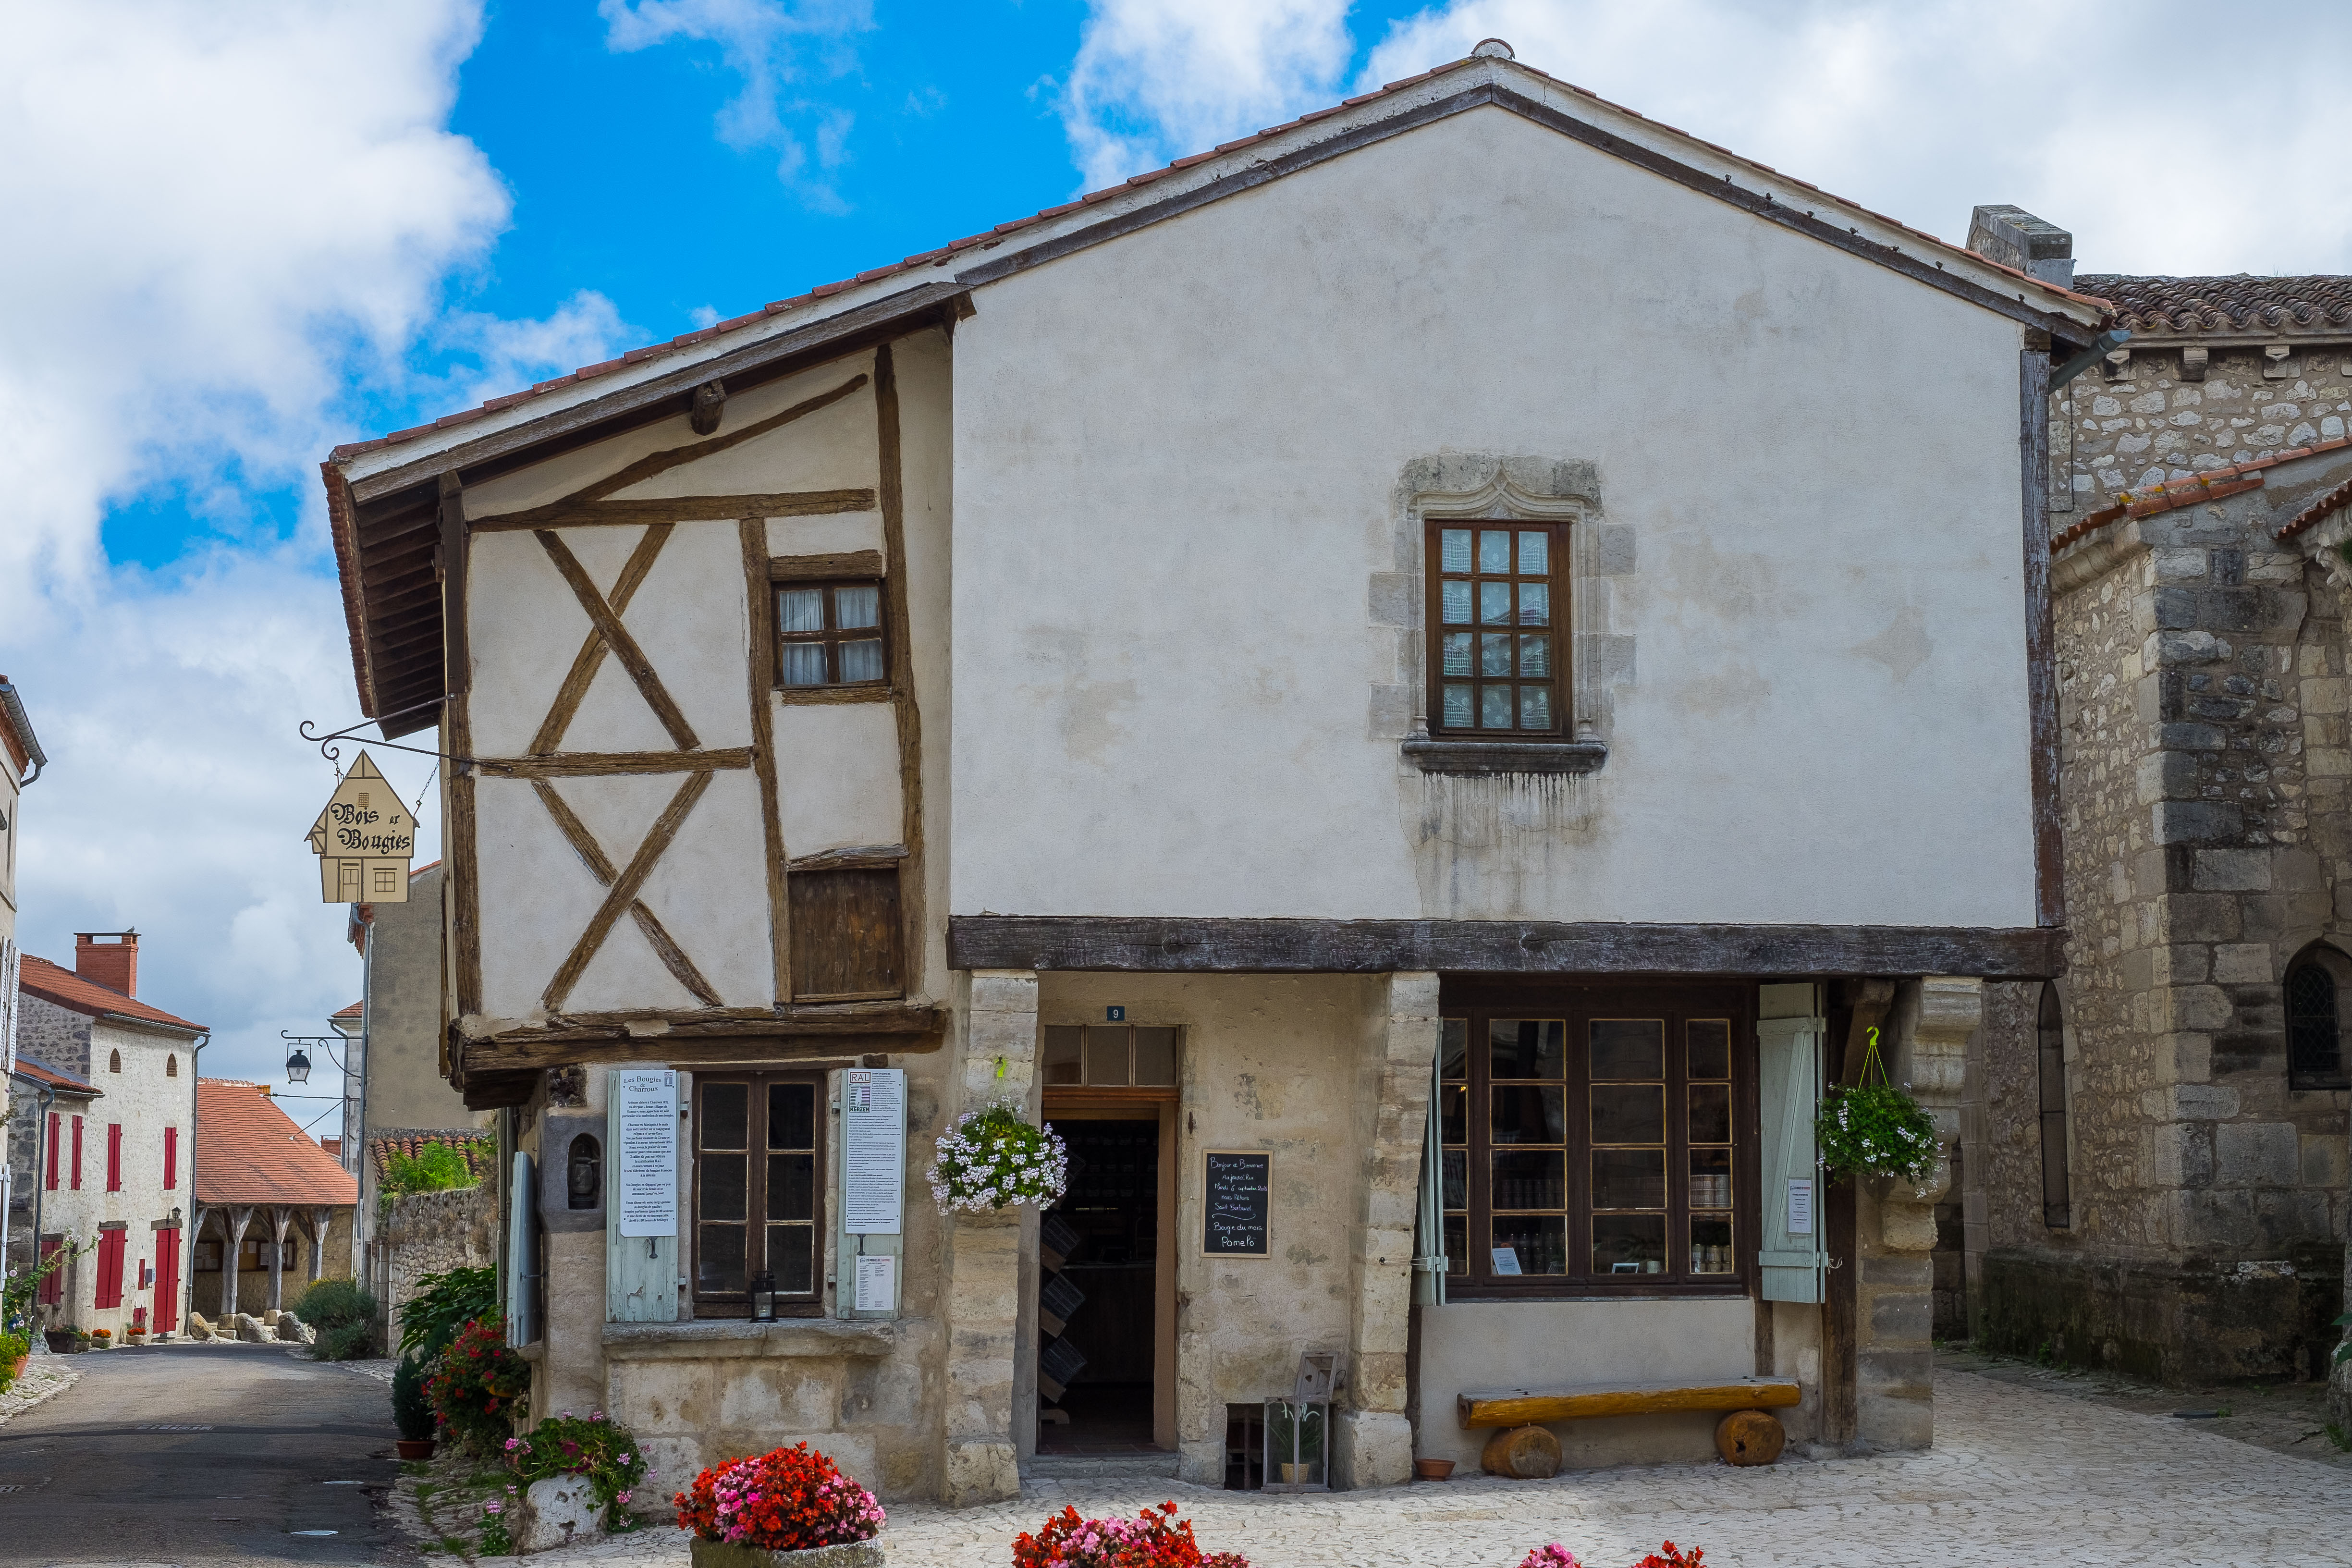 Charroux, in Auvergne, IS one of the "most beautiful"